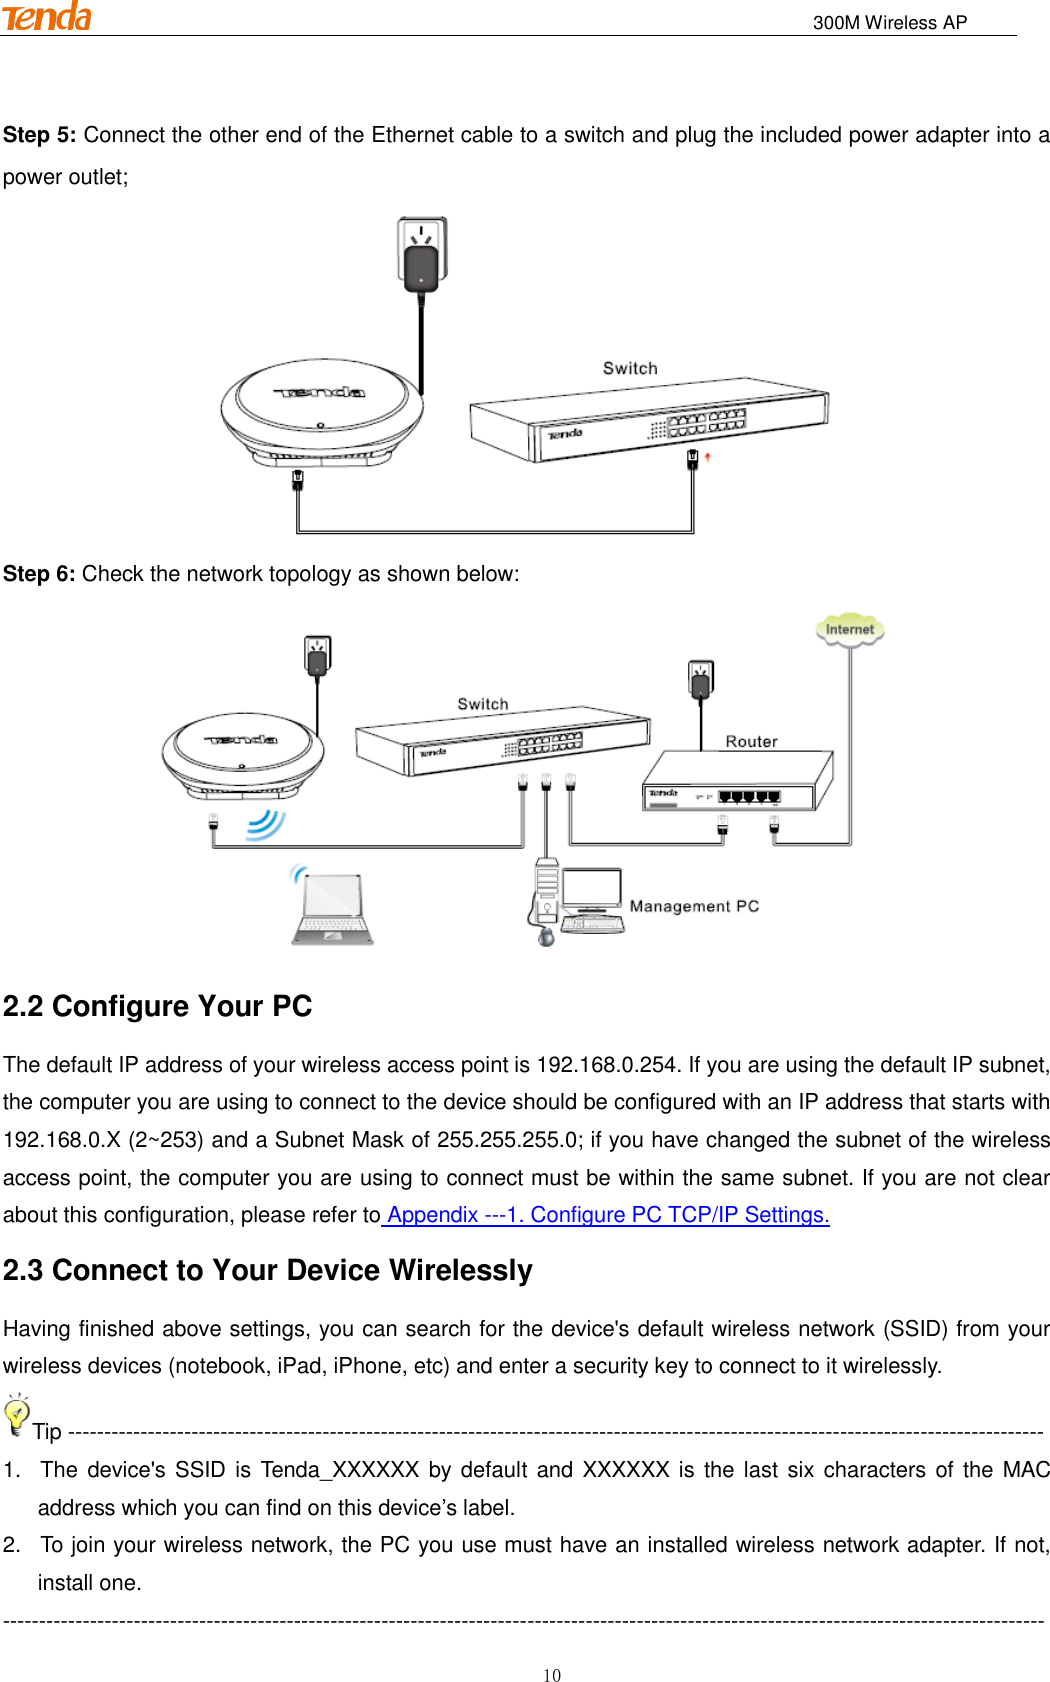                                                                              300M Wireless AP 10 Step 5: Connect the other end of the Ethernet cable to a switch and plug the included power adapter into a power outlet;  Step 6: Check the network topology as shown below:  2.2 Configure Your PC The default IP address of your wireless access point is 192.168.0.254. If you are using the default IP subnet, the computer you are using to connect to the device should be configured with an IP address that starts with 192.168.0.X (2~253) and a Subnet Mask of 255.255.255.0; if you have changed the subnet of the wireless access point, the computer you are using to connect must be within the same subnet. If you are not clear about this configuration, please refer to Appendix ---1. Configure PC TCP/IP Settings. 2.3 Connect to Your Device Wirelessly Having finished above settings, you can search for the device&apos;s default wireless network (SSID) from your wireless devices (notebook, iPad, iPhone, etc) and enter a security key to connect to it wirelessly. Tip -------------------------------------------------------------------------------------------------------------------------------------- 1.  The device&apos;s SSID is Tenda_XXXXXX by default and  XXXXXX is the  last  six characters of the MAC address which you can find on this device’s label. 2.  To join your wireless network, the PC you use must have an installed wireless network adapter. If not, install one. ----------------------------------------------------------------------------------------------------------------------------------------------- 